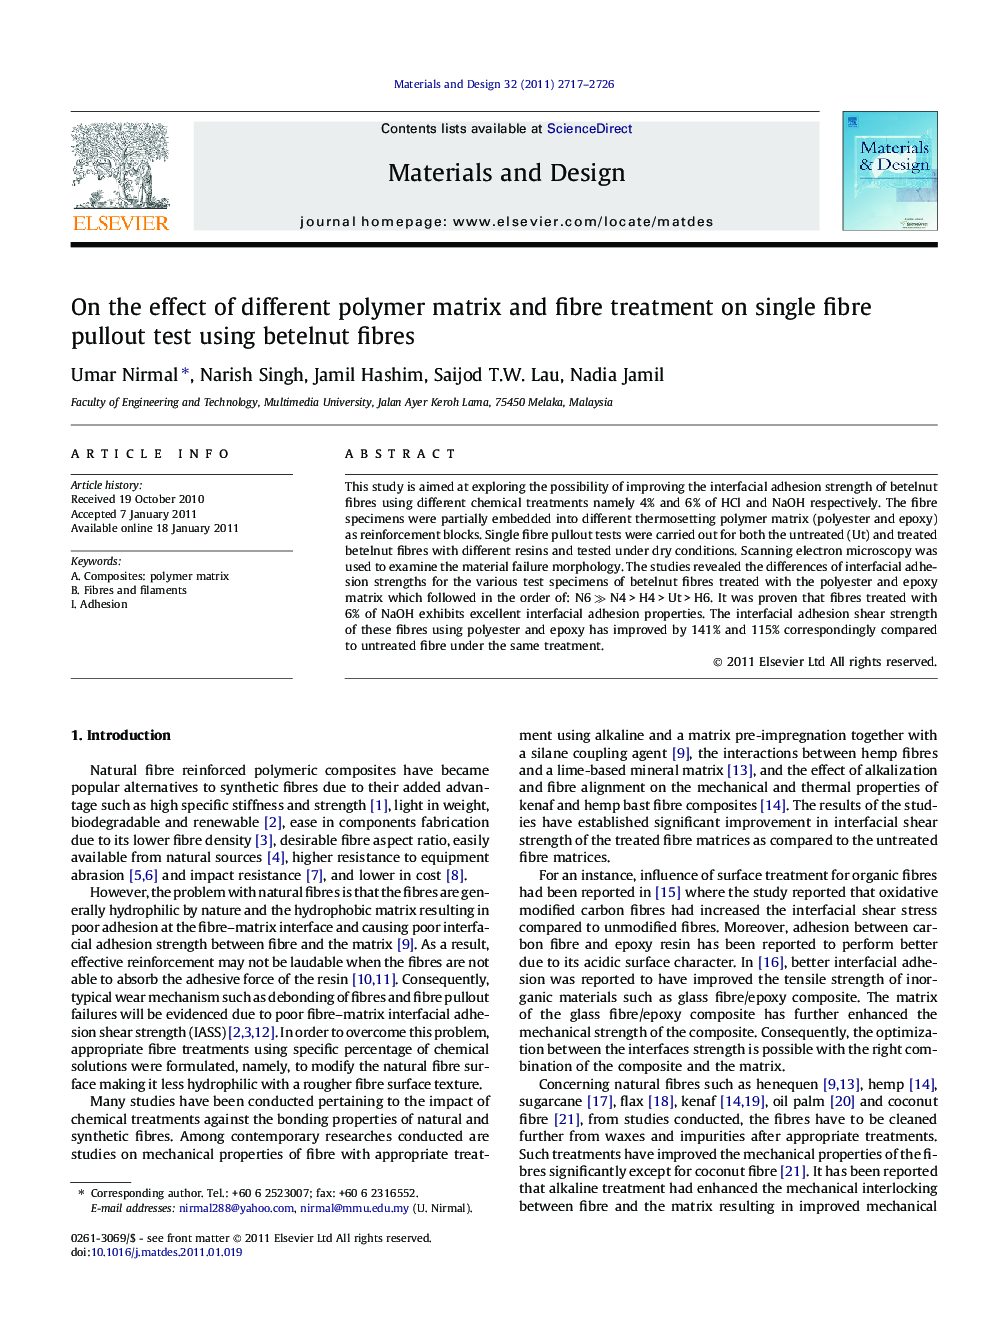 On the effect of different polymer matrix and fibre treatment on single fibre pullout test using betelnut fibres